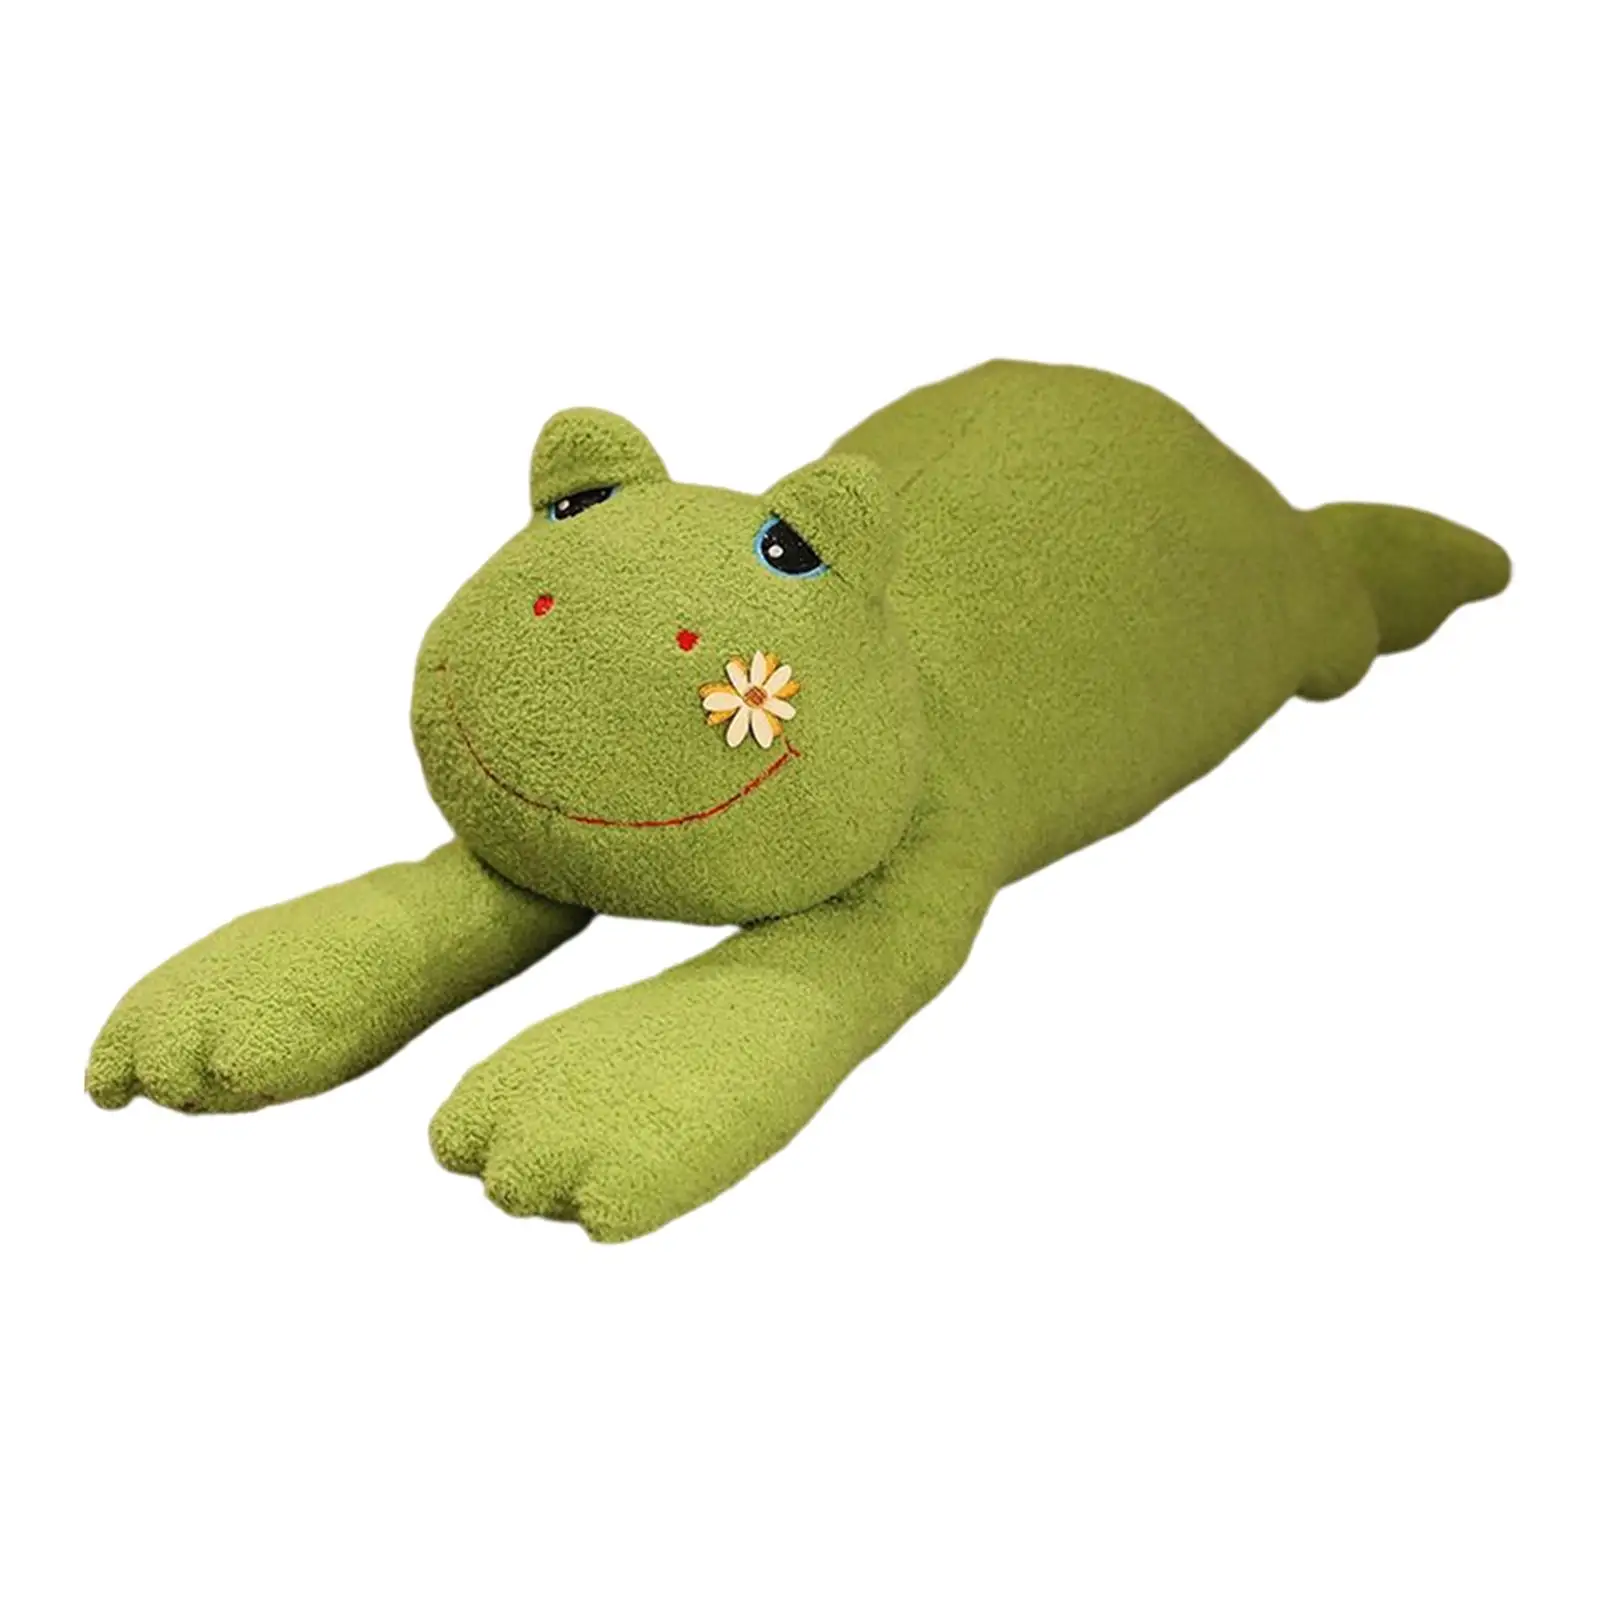 Adorable Frog Plush Toy pillow ,Home Decoration ,Soft Stuffed Animal for Theme Party